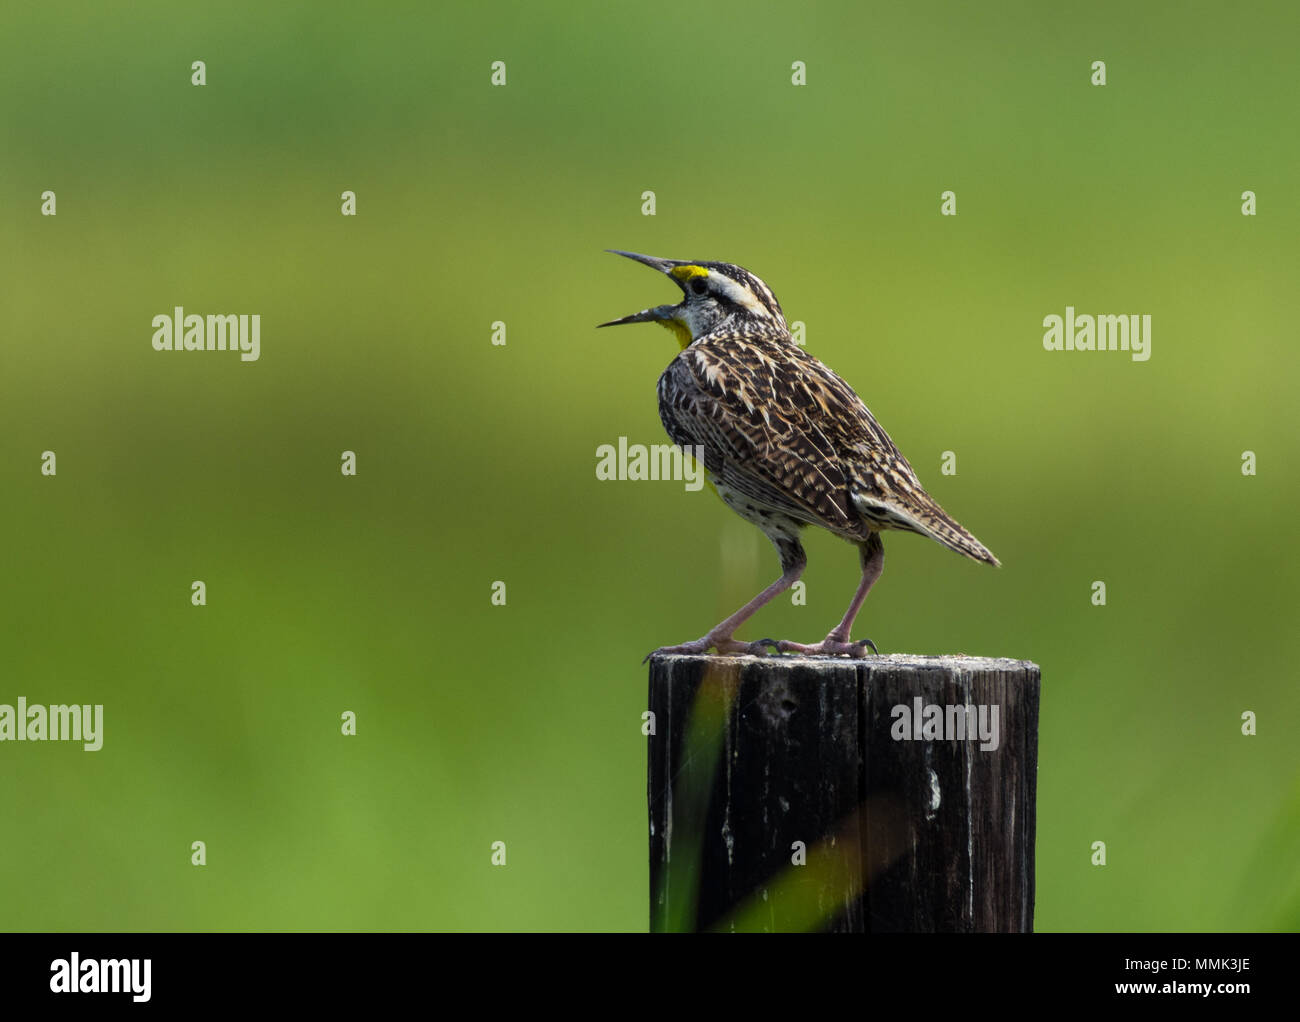 A Eastern Meadowlark (Sturnella magna) singing on top of a wooden post. Anahuac National Wildlife Refuge, Texas, USA. Stock Photo